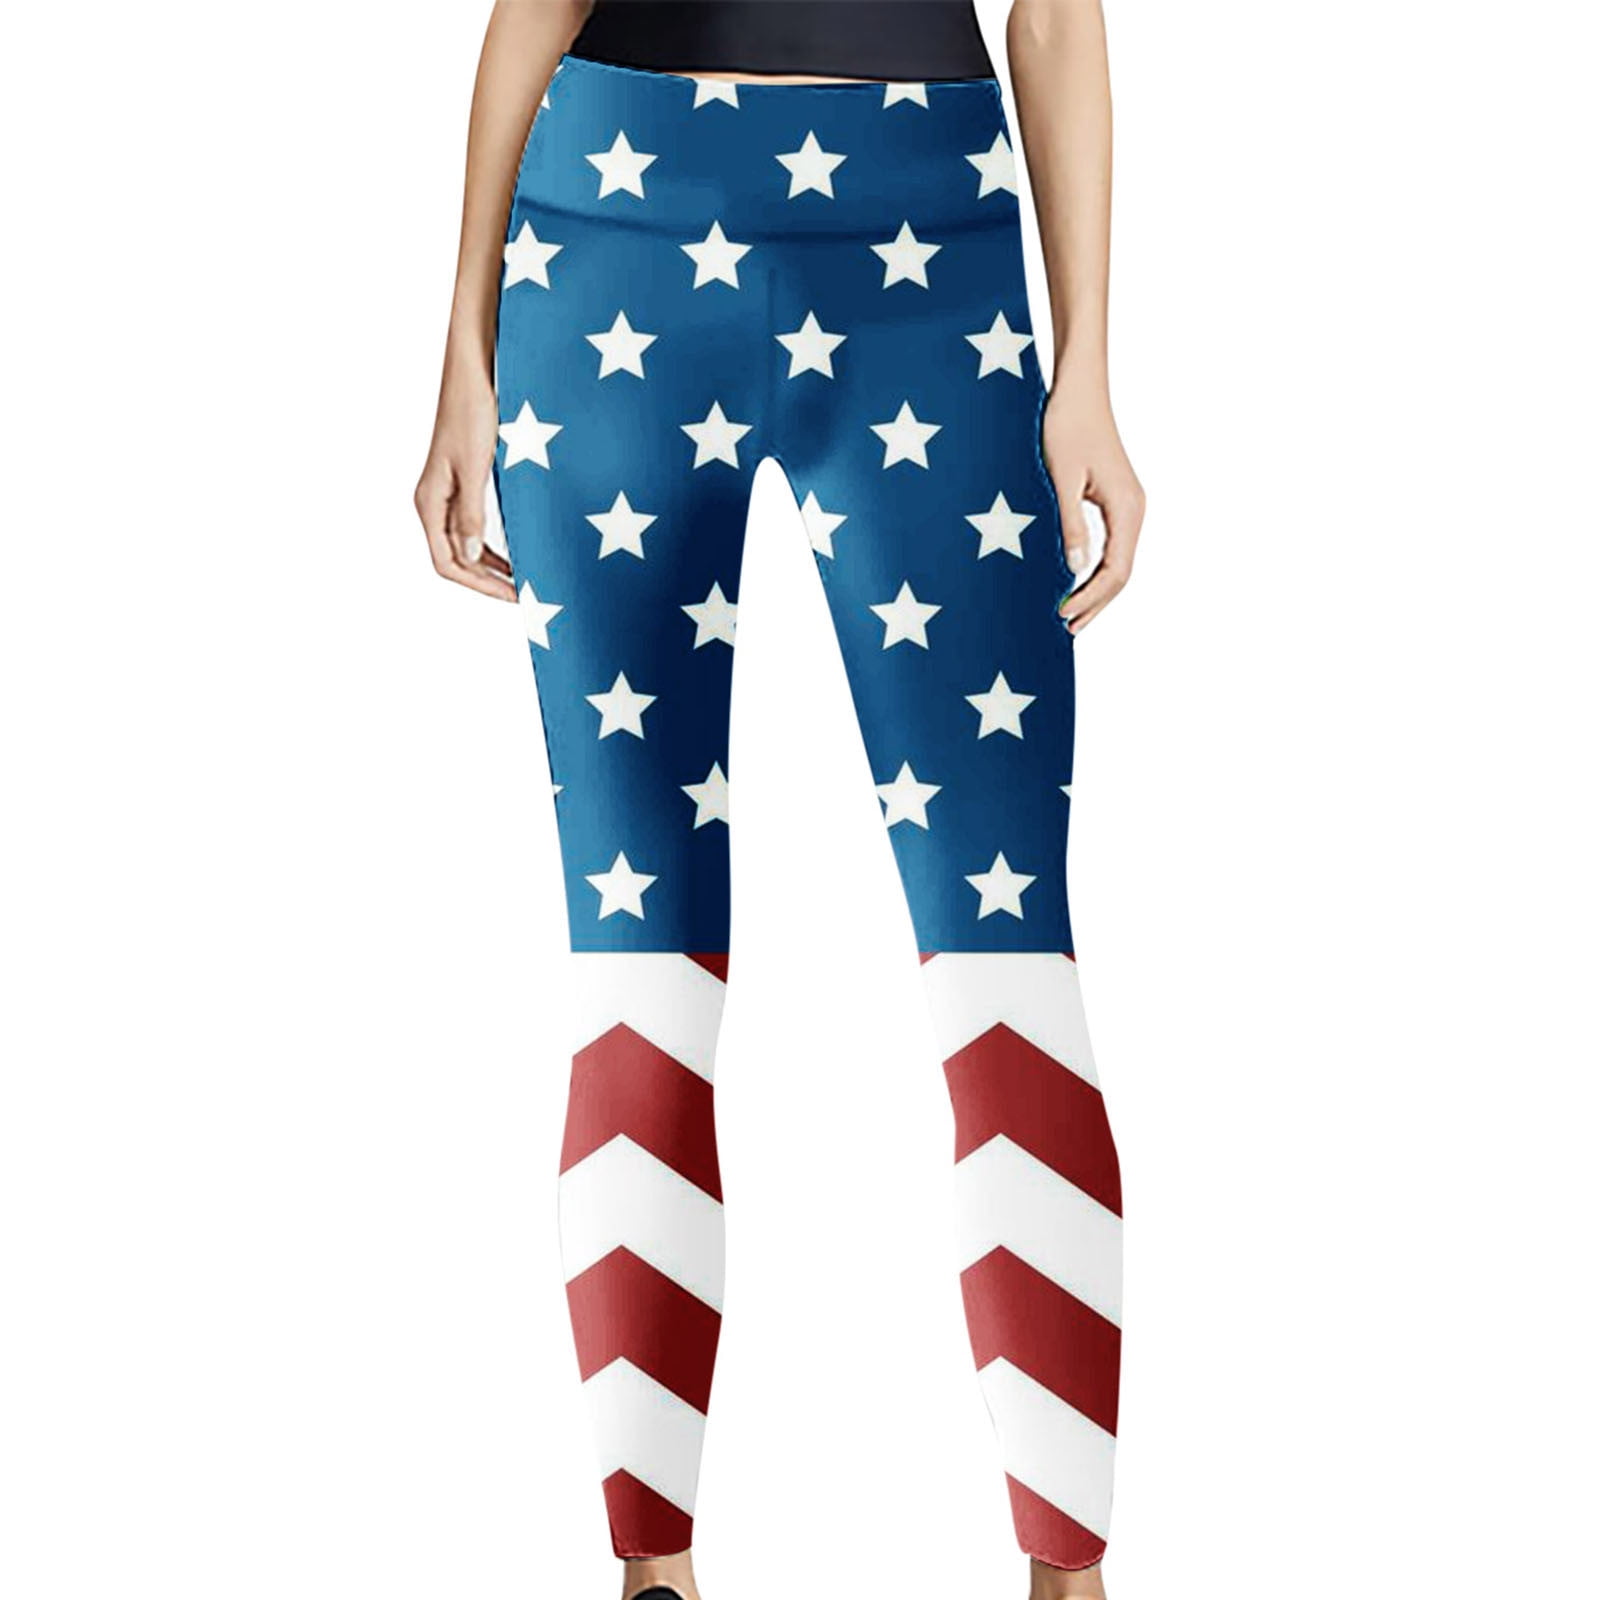 Make America Great Again Leggings Red, White and Blue – Miss Deplorable